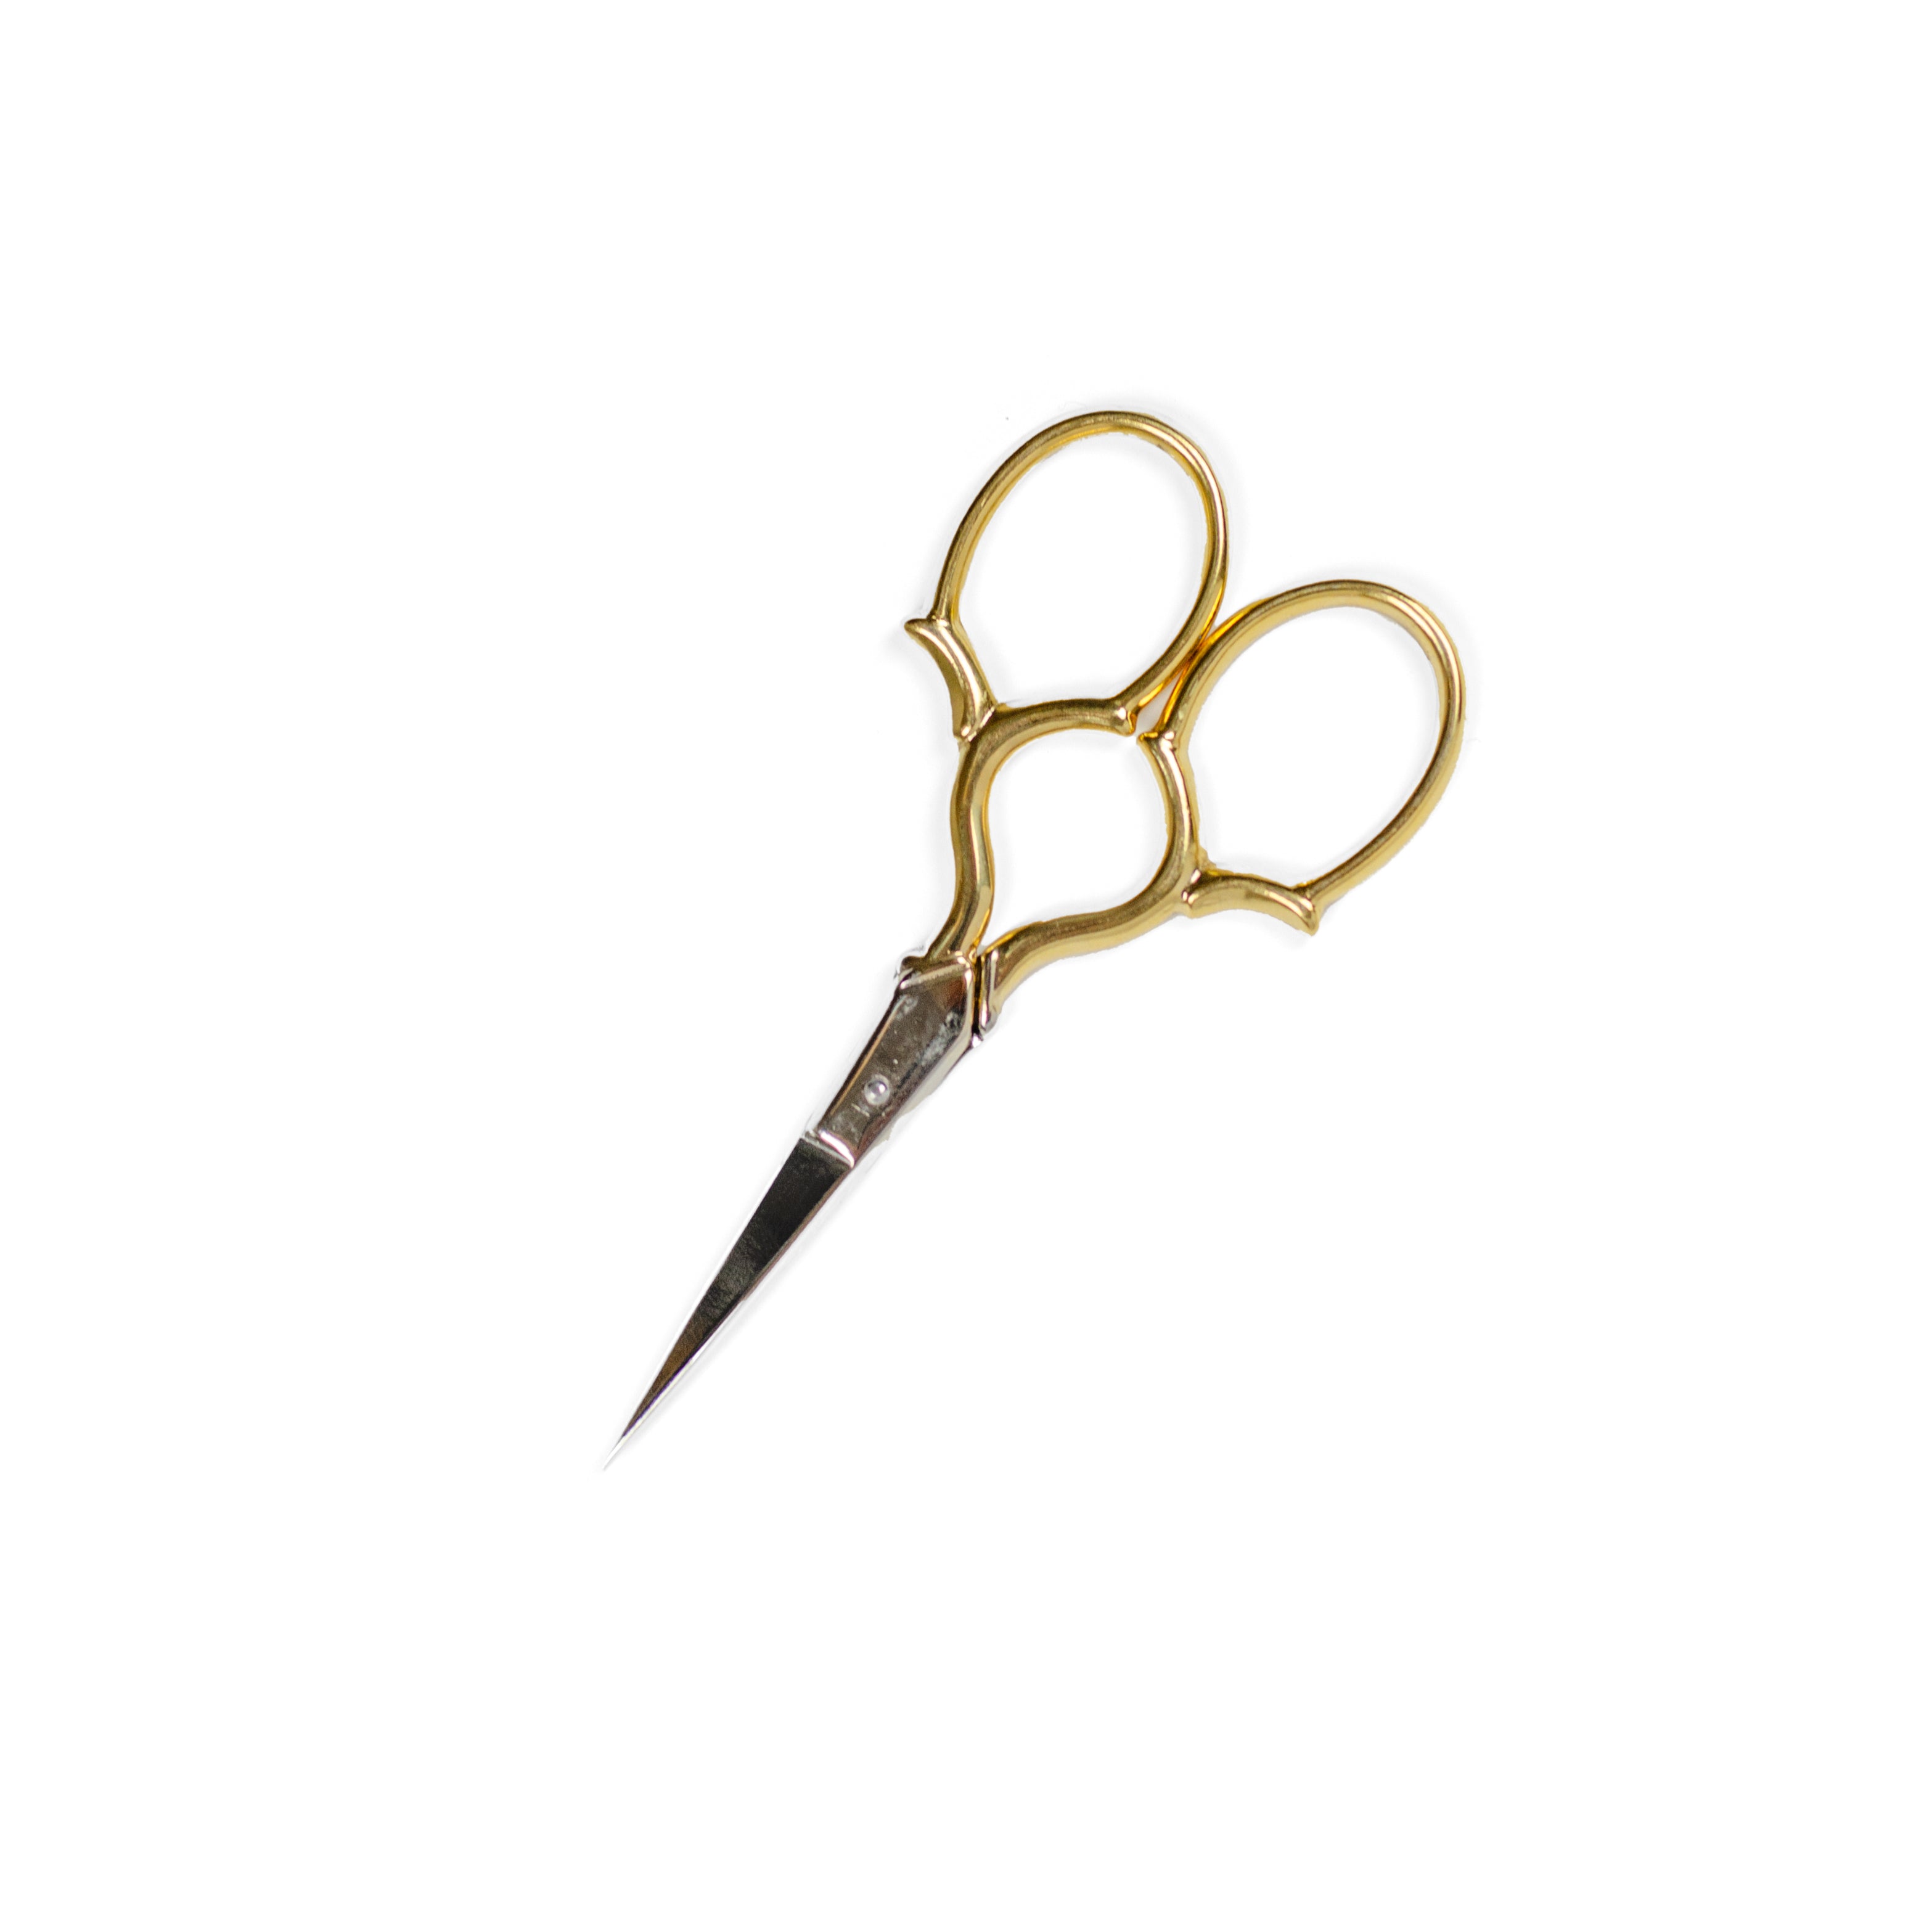 WISS USA 4 PROFESSIONALLY SHARPENED NEEDLEPOINT EMBROIDERY SEWING SCISSORS  #764